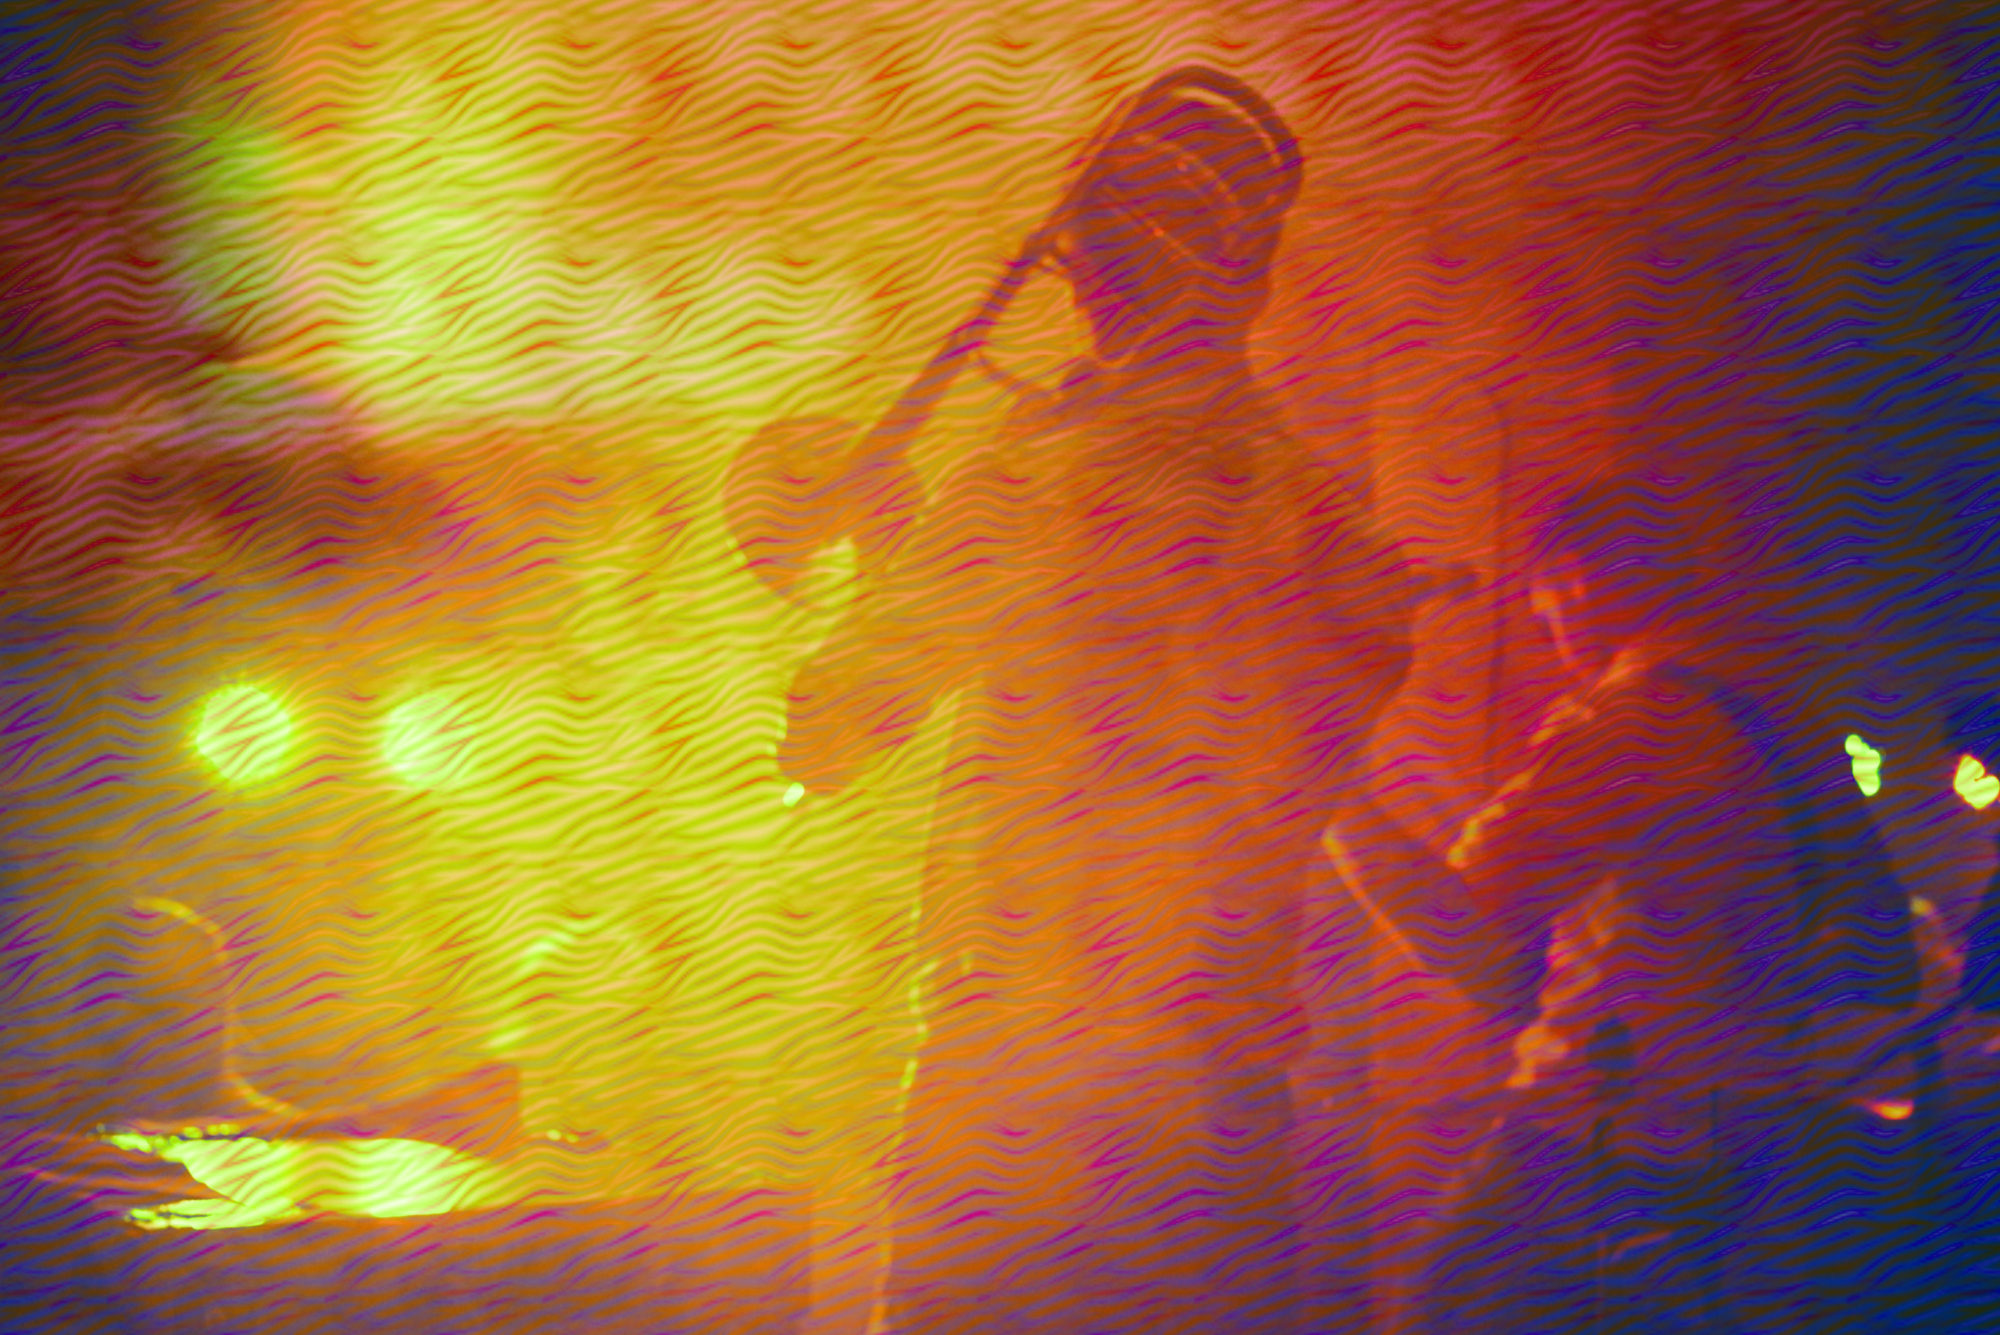 Image of back of band the visible instrument is a the back of a trombone the image is all orange and yellow distorting the image of the band members to give a hazy quality